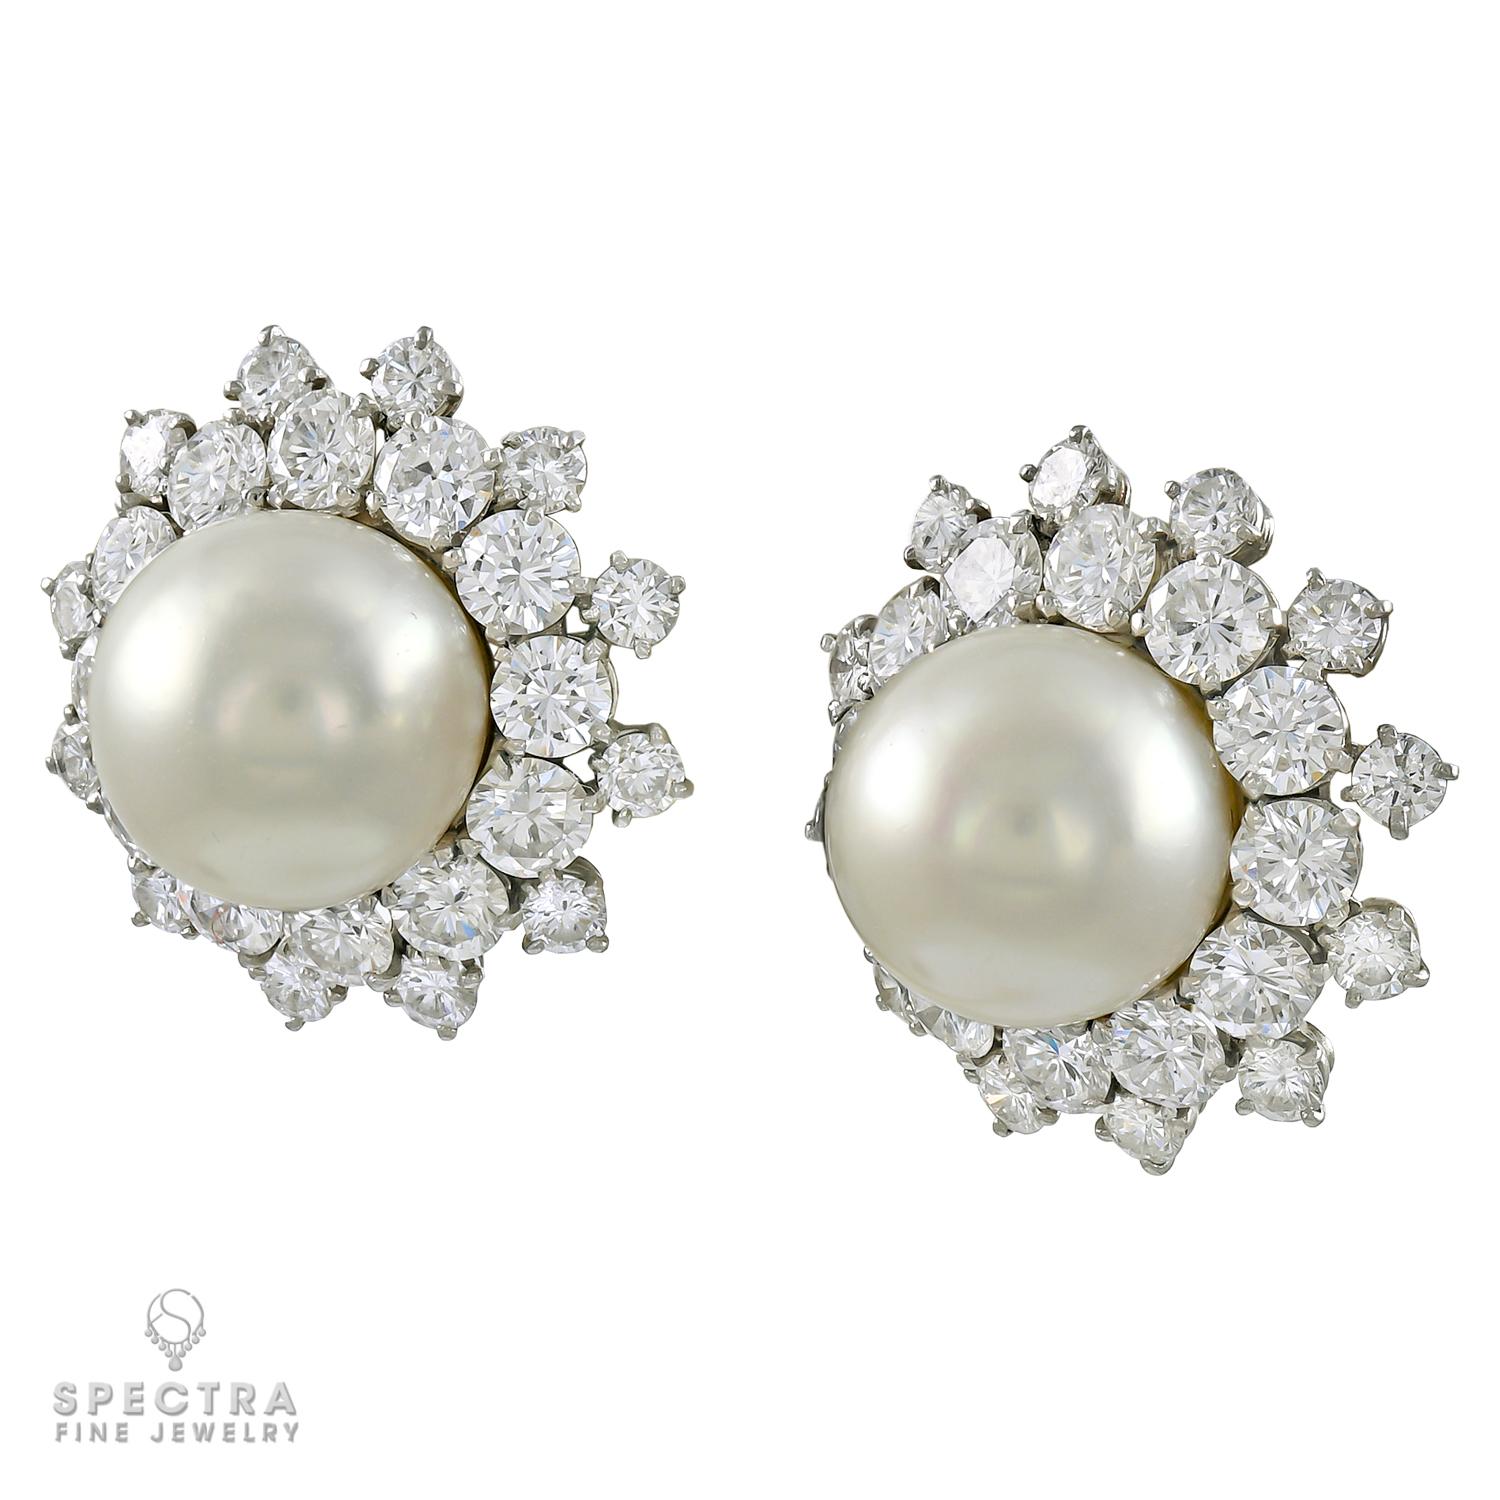 The only thing more captivating than a perfectly round, smooth, lustrous pearl is heightened by a scattered diamond halo. These Van Cleef & Arpels Vintage Pearl Diamond Halo Button Earrings, made in NY circa 1980s, feature the utterly elegant and